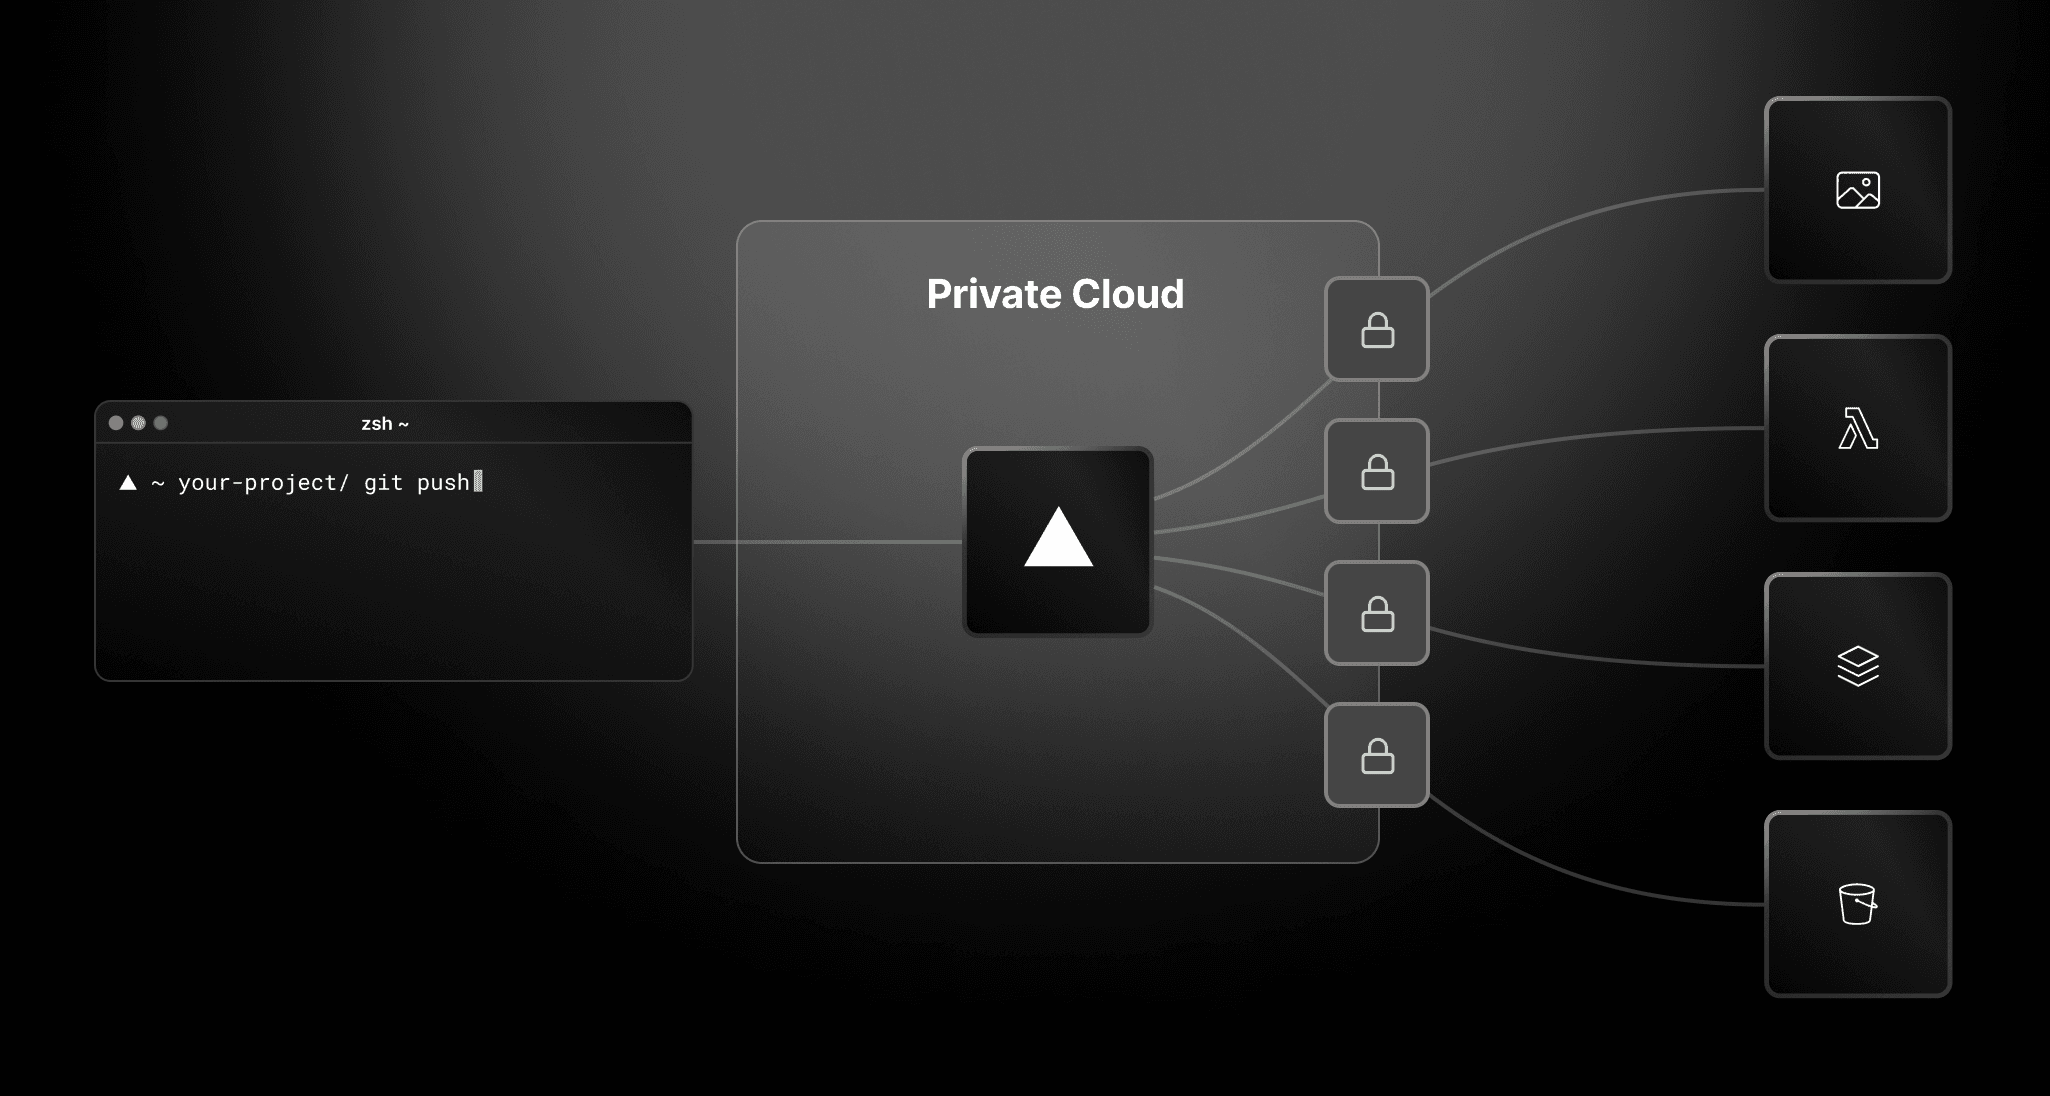 With Secure Compute, you can create connections between your Vercel Serverless Functions, deployment builds, and backend cloud infrastructure to further restrict access to authorized sources.